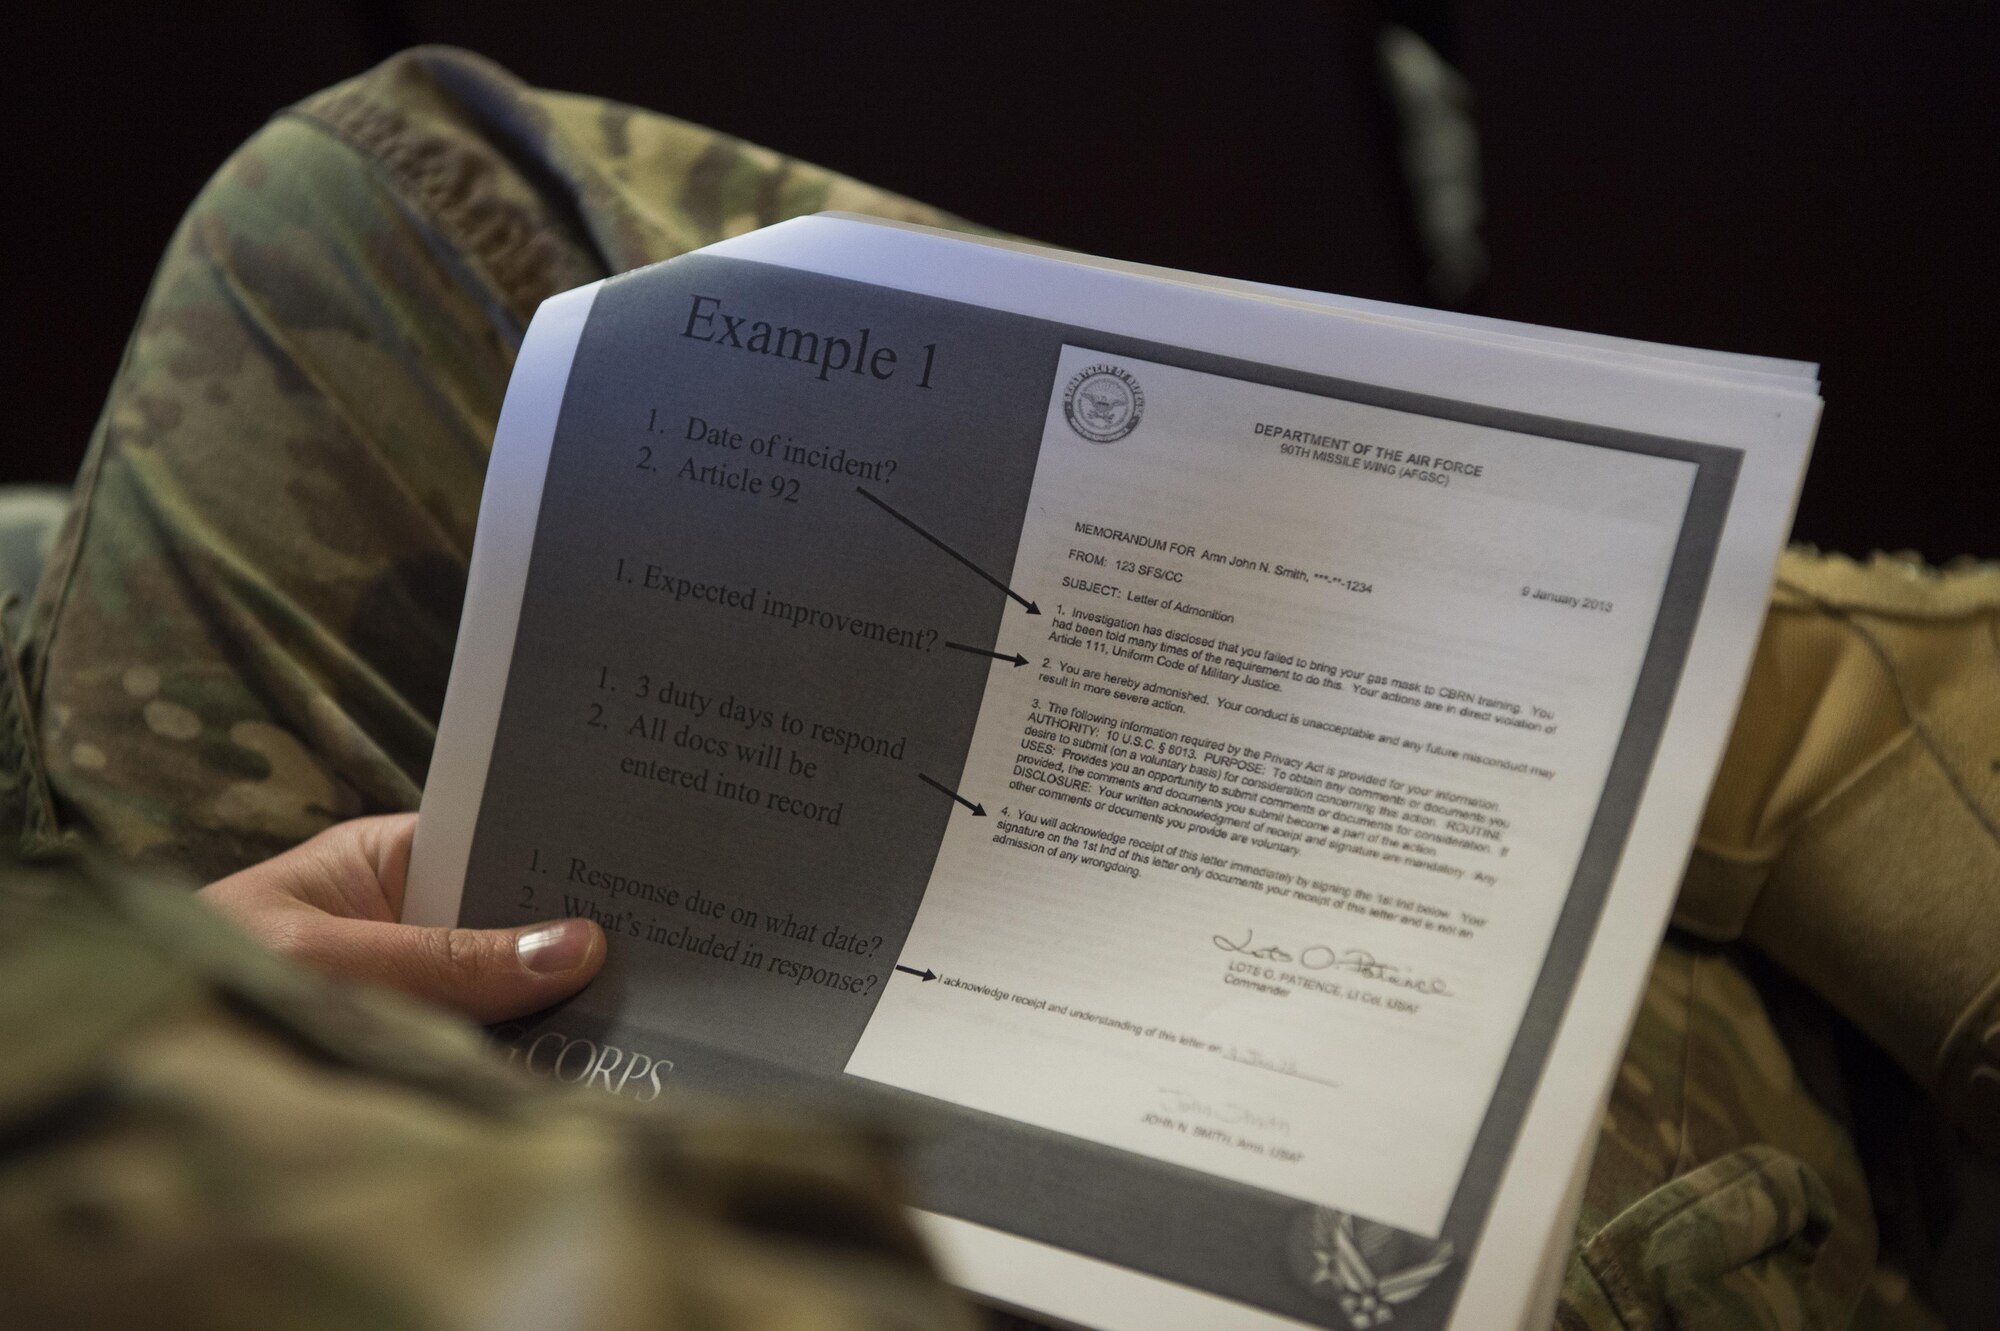 An Airman holds an informational handout during a Military Justice 101: Administrative Paperwork class at F.E. Warren Air Force Base, Wyo., April 5, 2017. The class covered topics such as writing letters of counseling and reprimand, and detailed the mistakes which are often made by supervisors and commanders. (U.S. Air Force photo by Staff Sgt. Christopher Ruano)